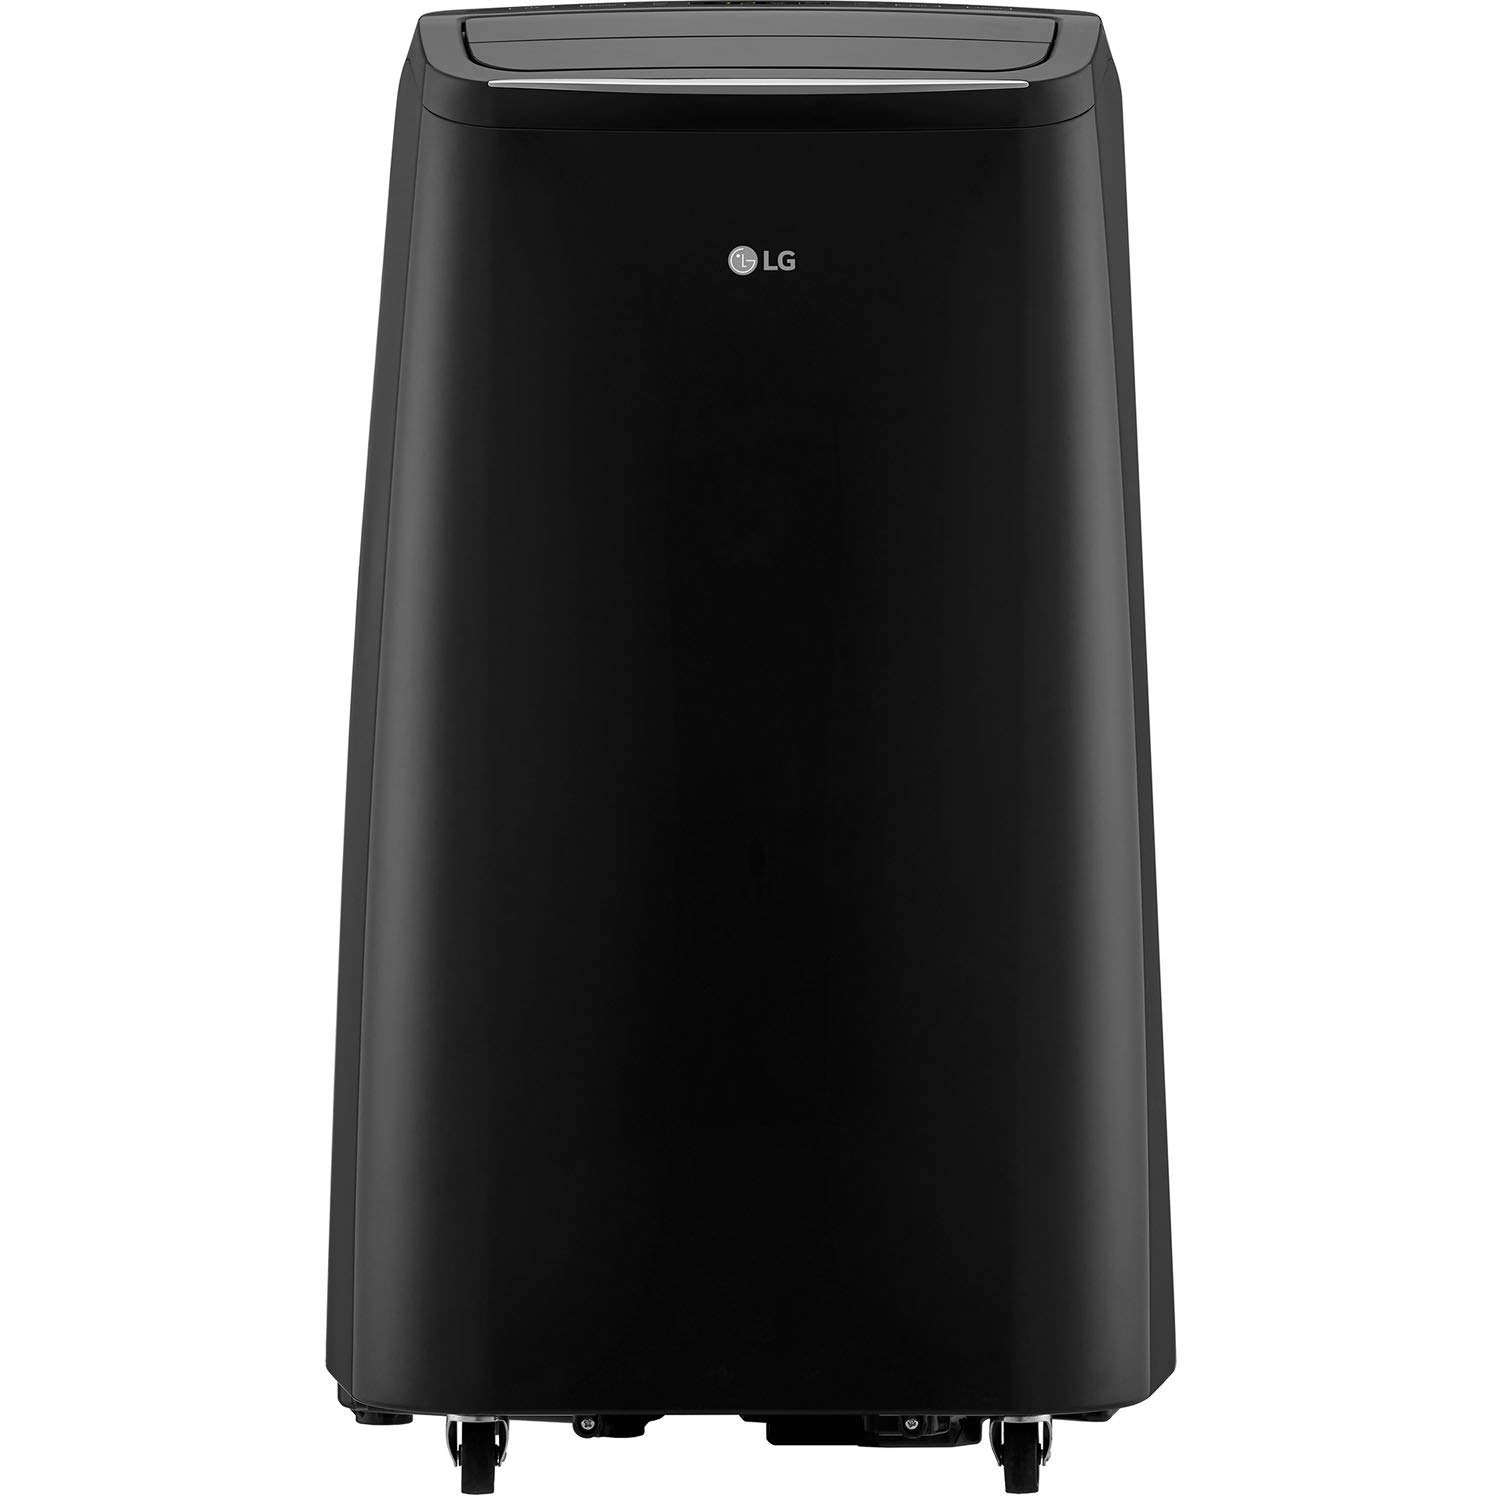 LG Portable Air Conditioner, 400 sq. ft